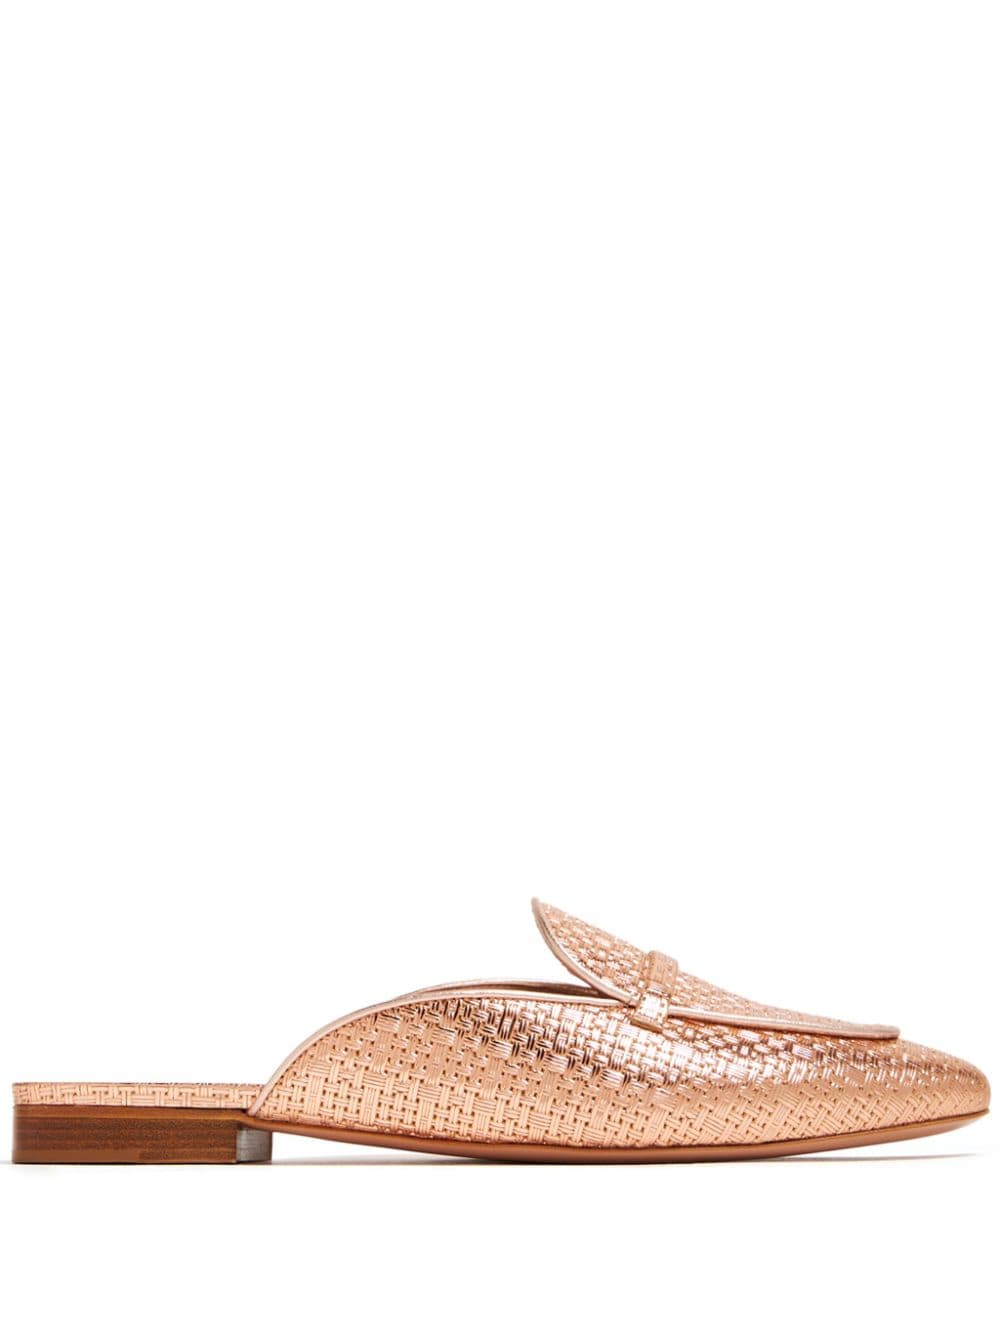 Malone Souliers Berto leather mules - Gold von Malone Souliers